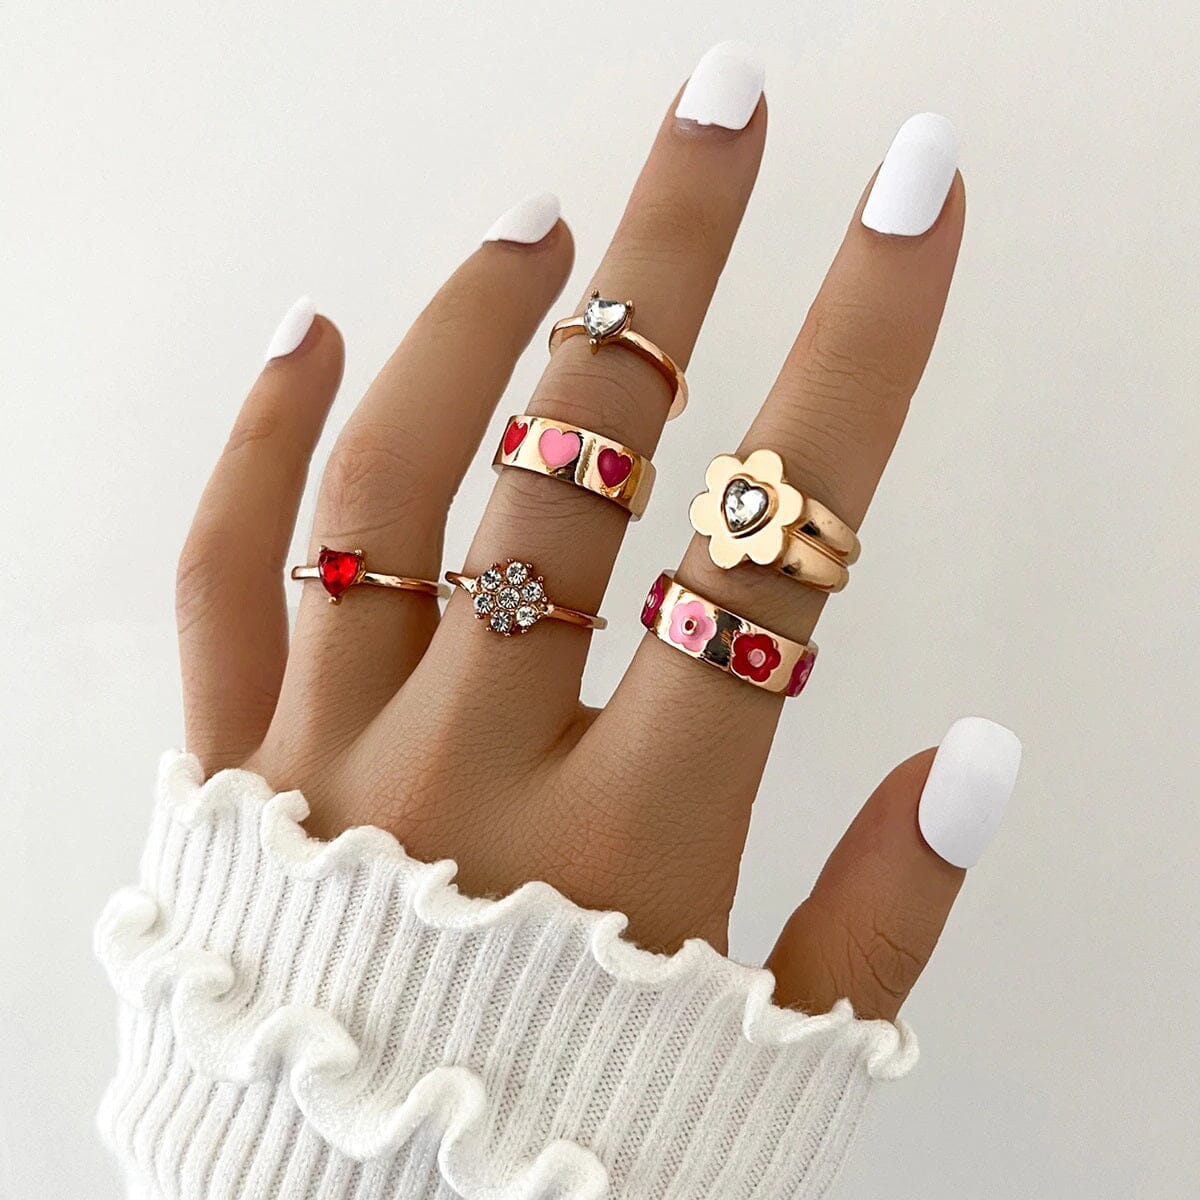 Women Teen Girls Vintage Cute Fashion Knuckle Stacking Ring Set_ Jewelry jehouze 9 